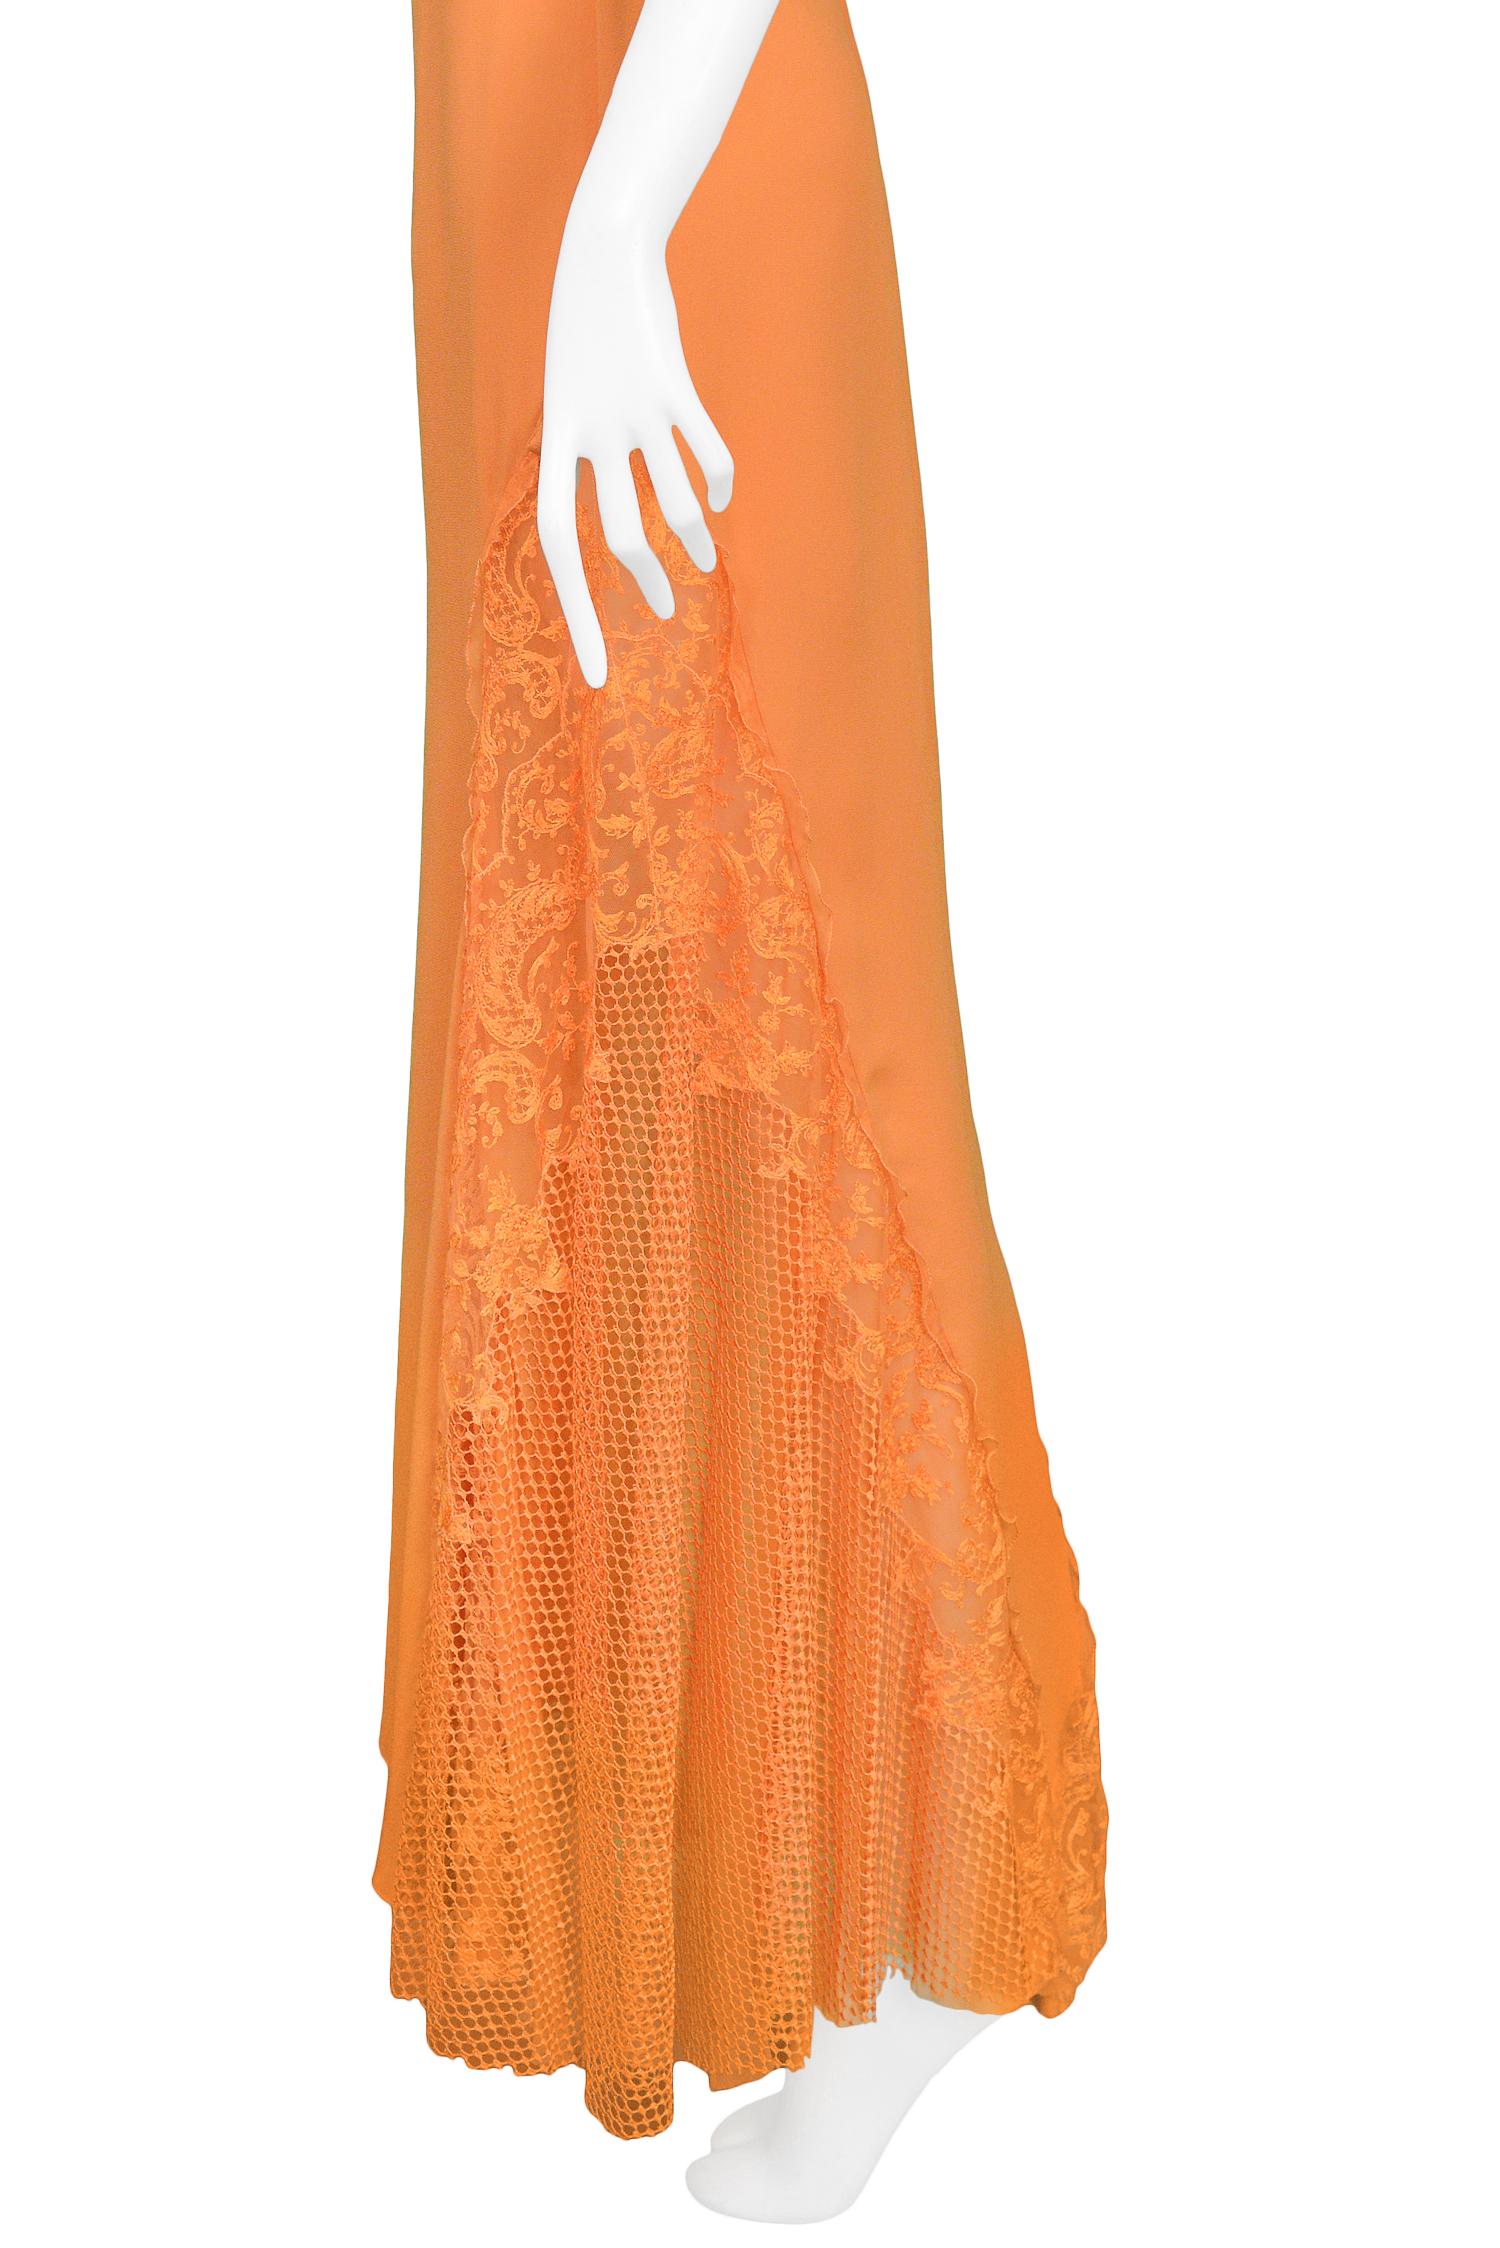 Vintage Gianni Versace Apricot Lace Runway Gown 1997  In Excellent Condition In Los Angeles, CA